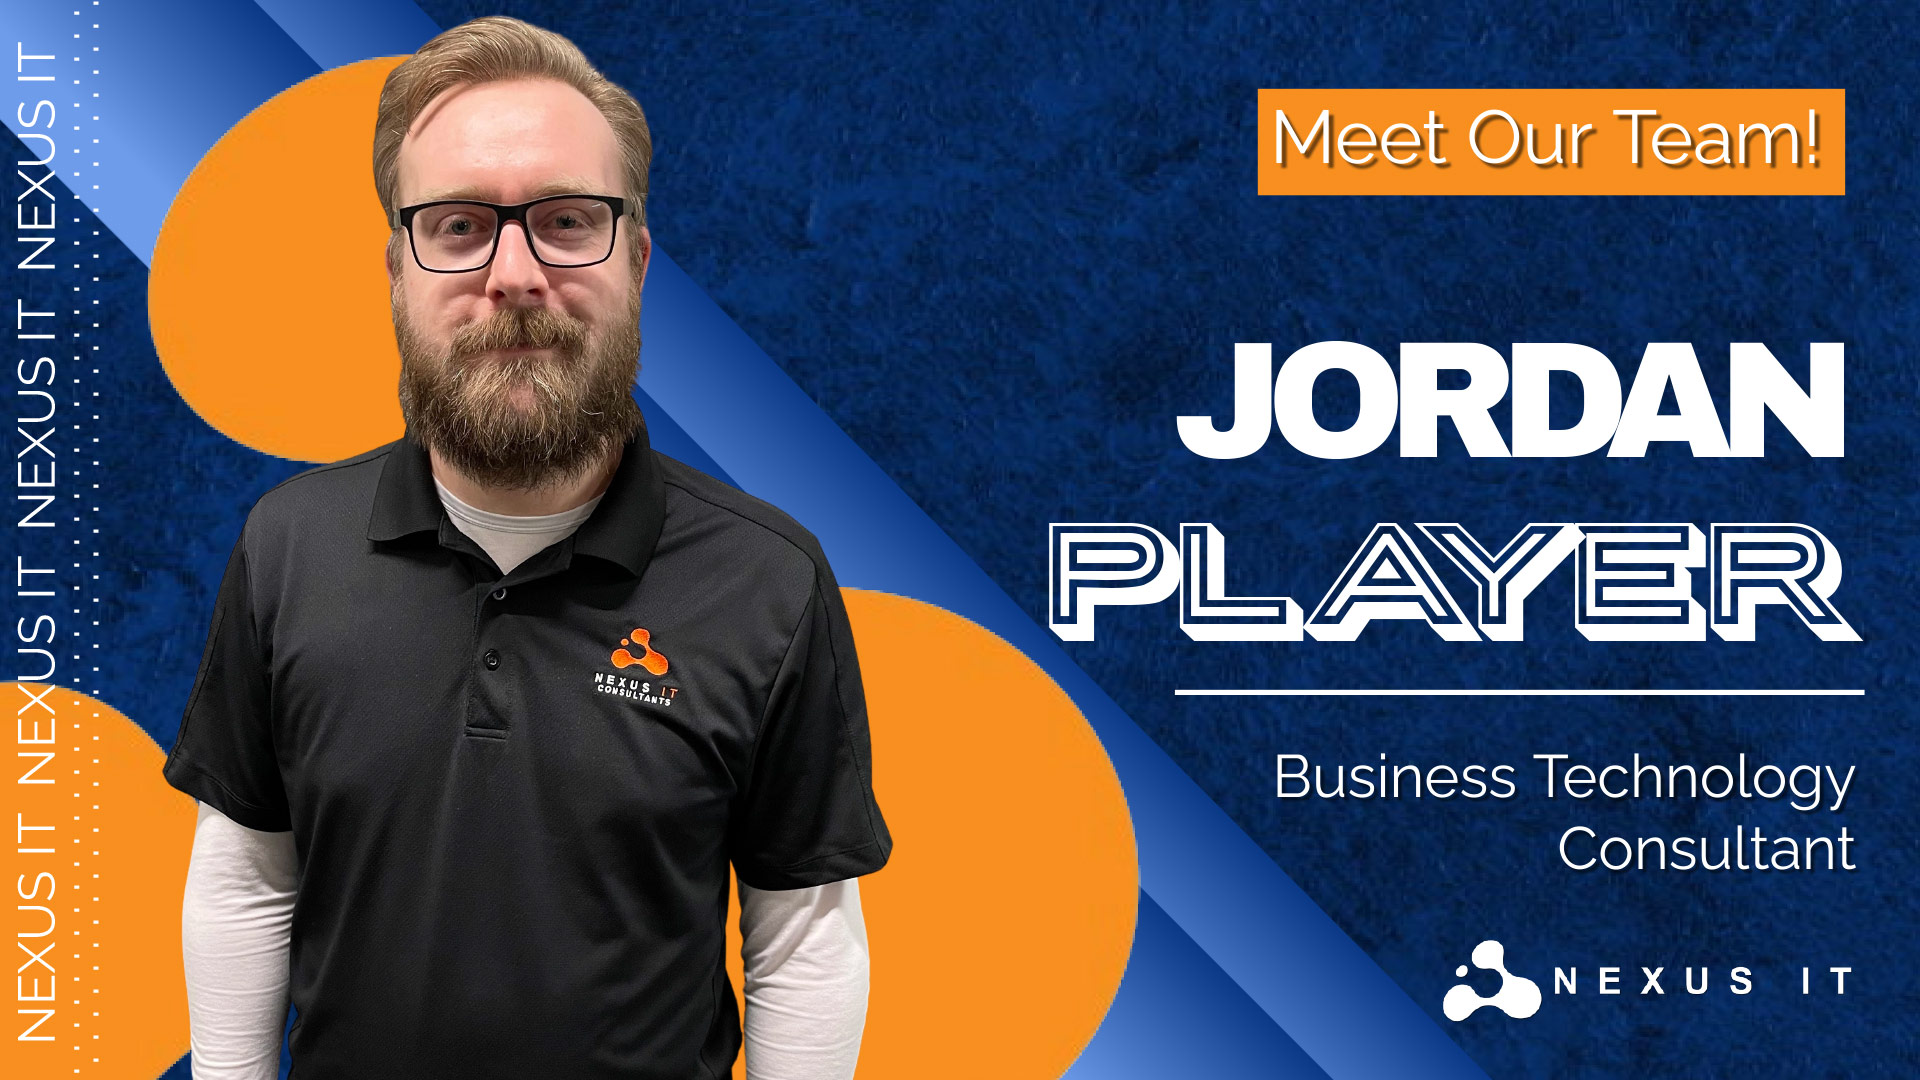 Jordan Player – The Newest Addition To Nexus’ Team Of IT Experts